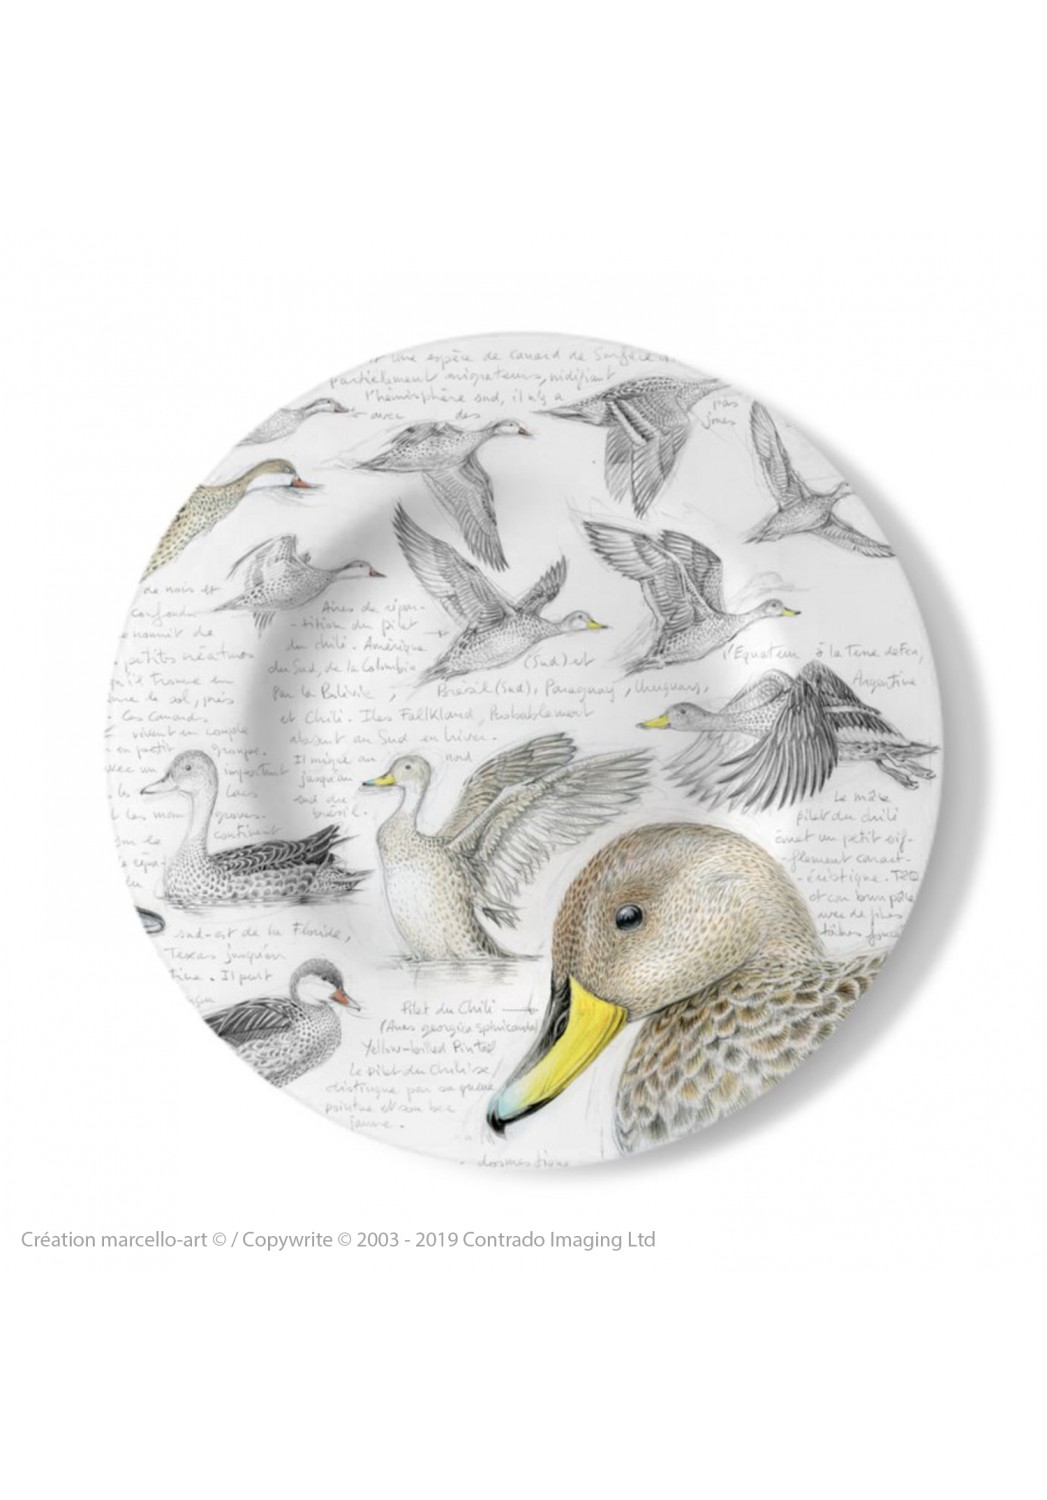 Marcello-art: Decorating Plates Decoration plates 234 White-cheeked pintail & Yellow-billed Pintail